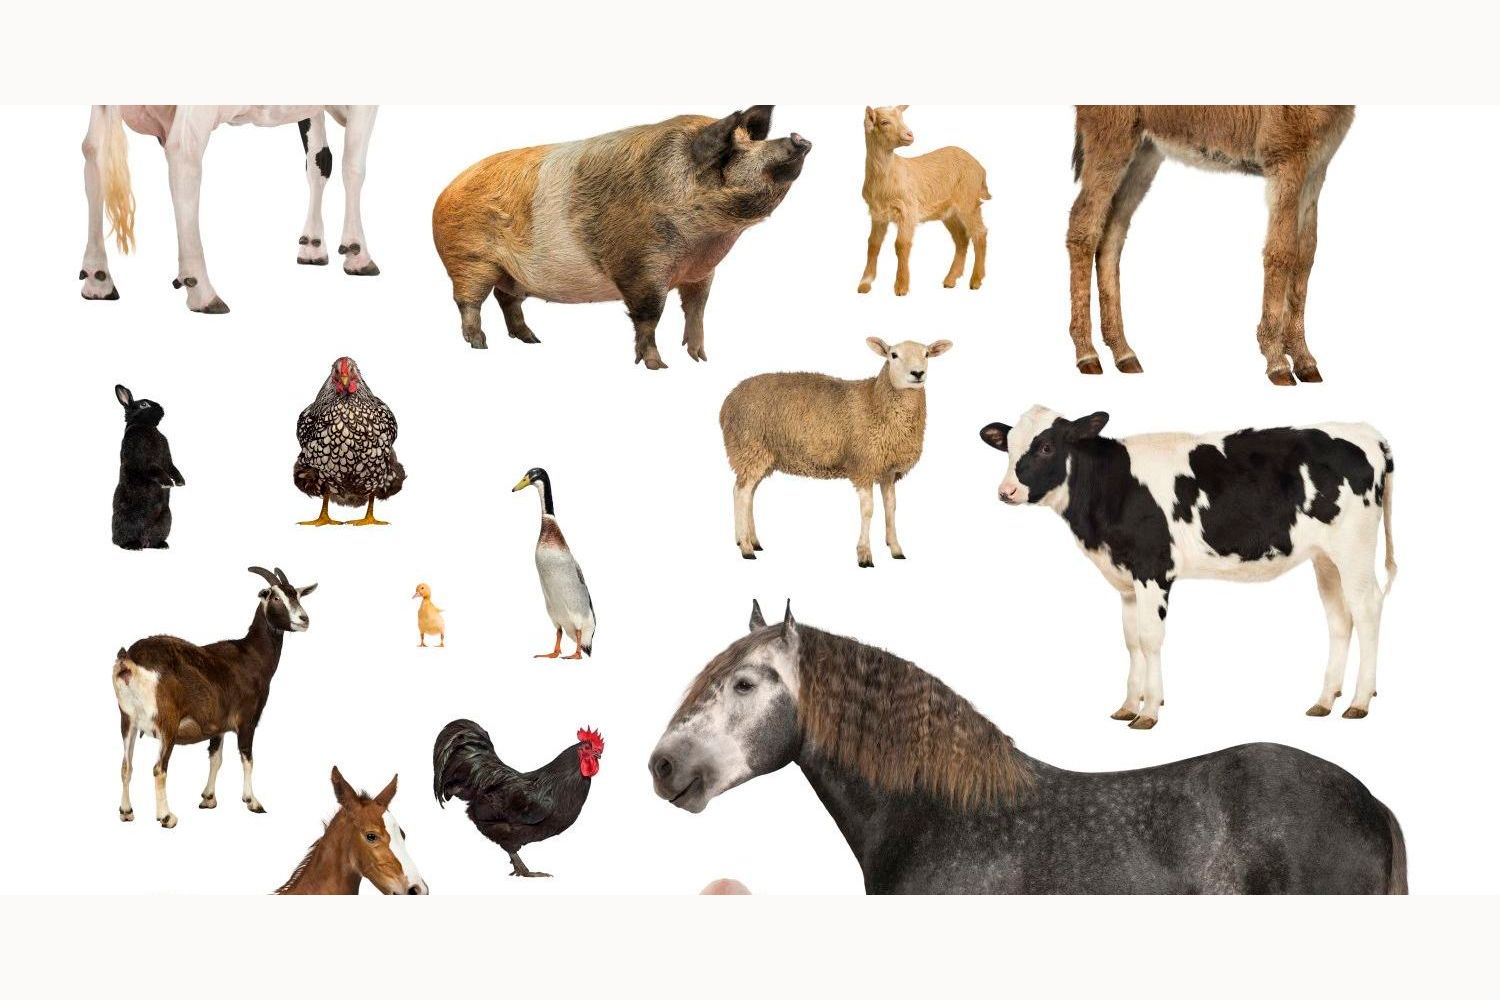 Can You Recognize All of These Animals?